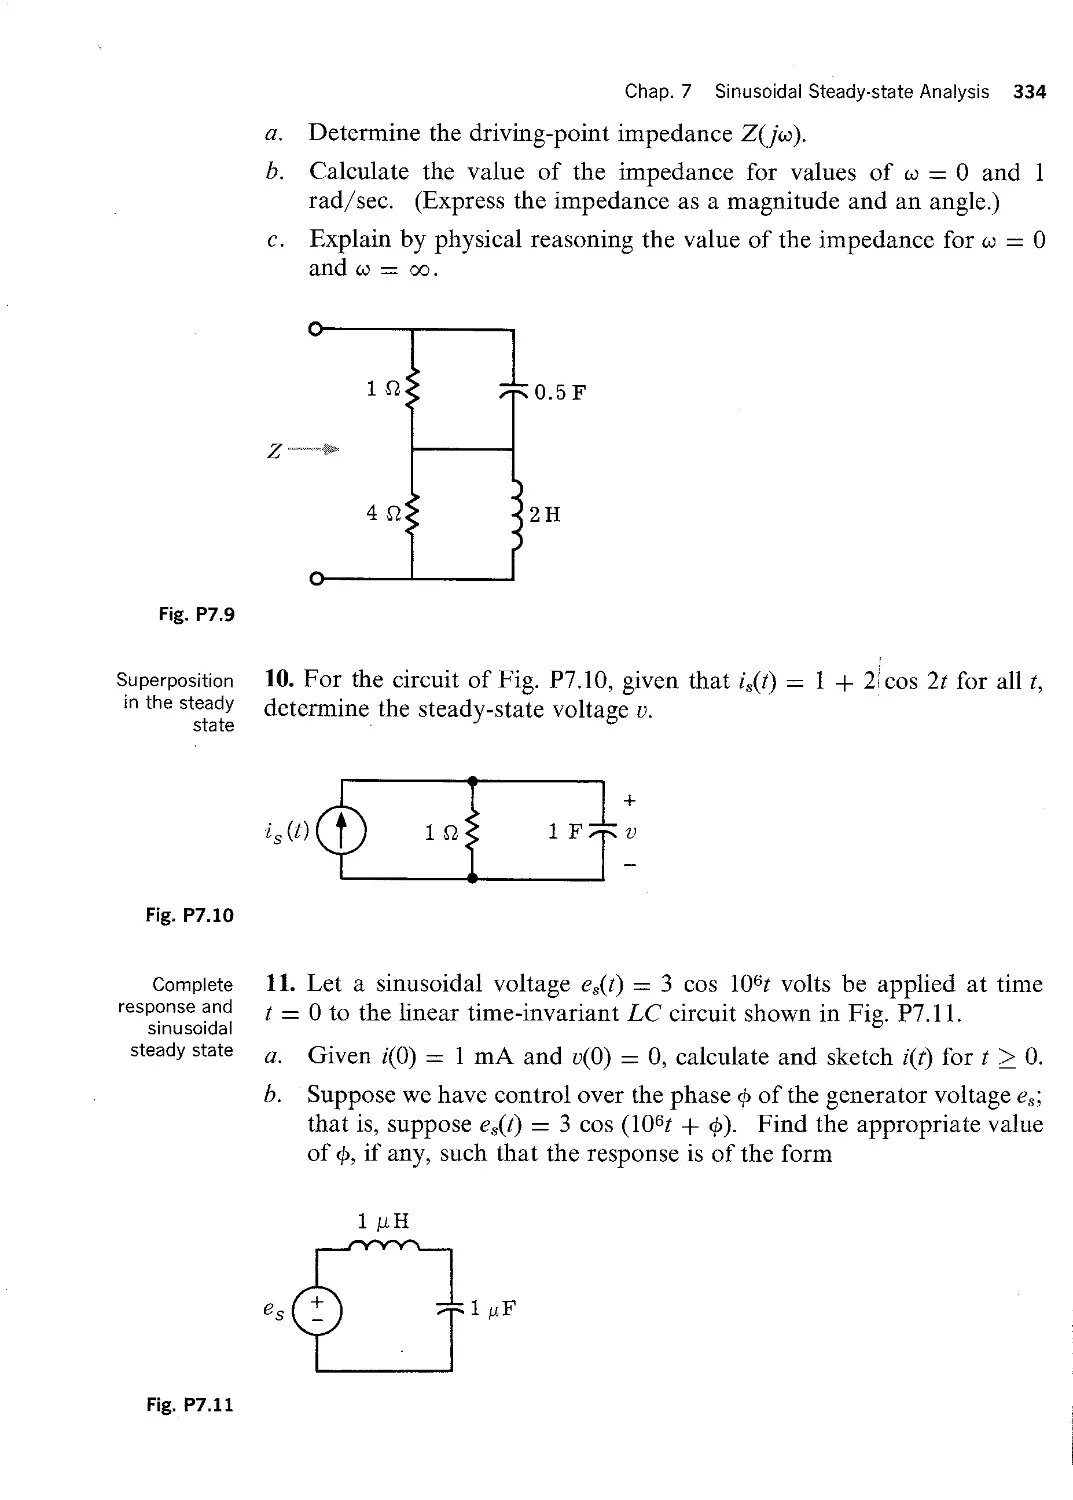 2.2 - Energy Balance in a Nonlinear Time-varying Inductor